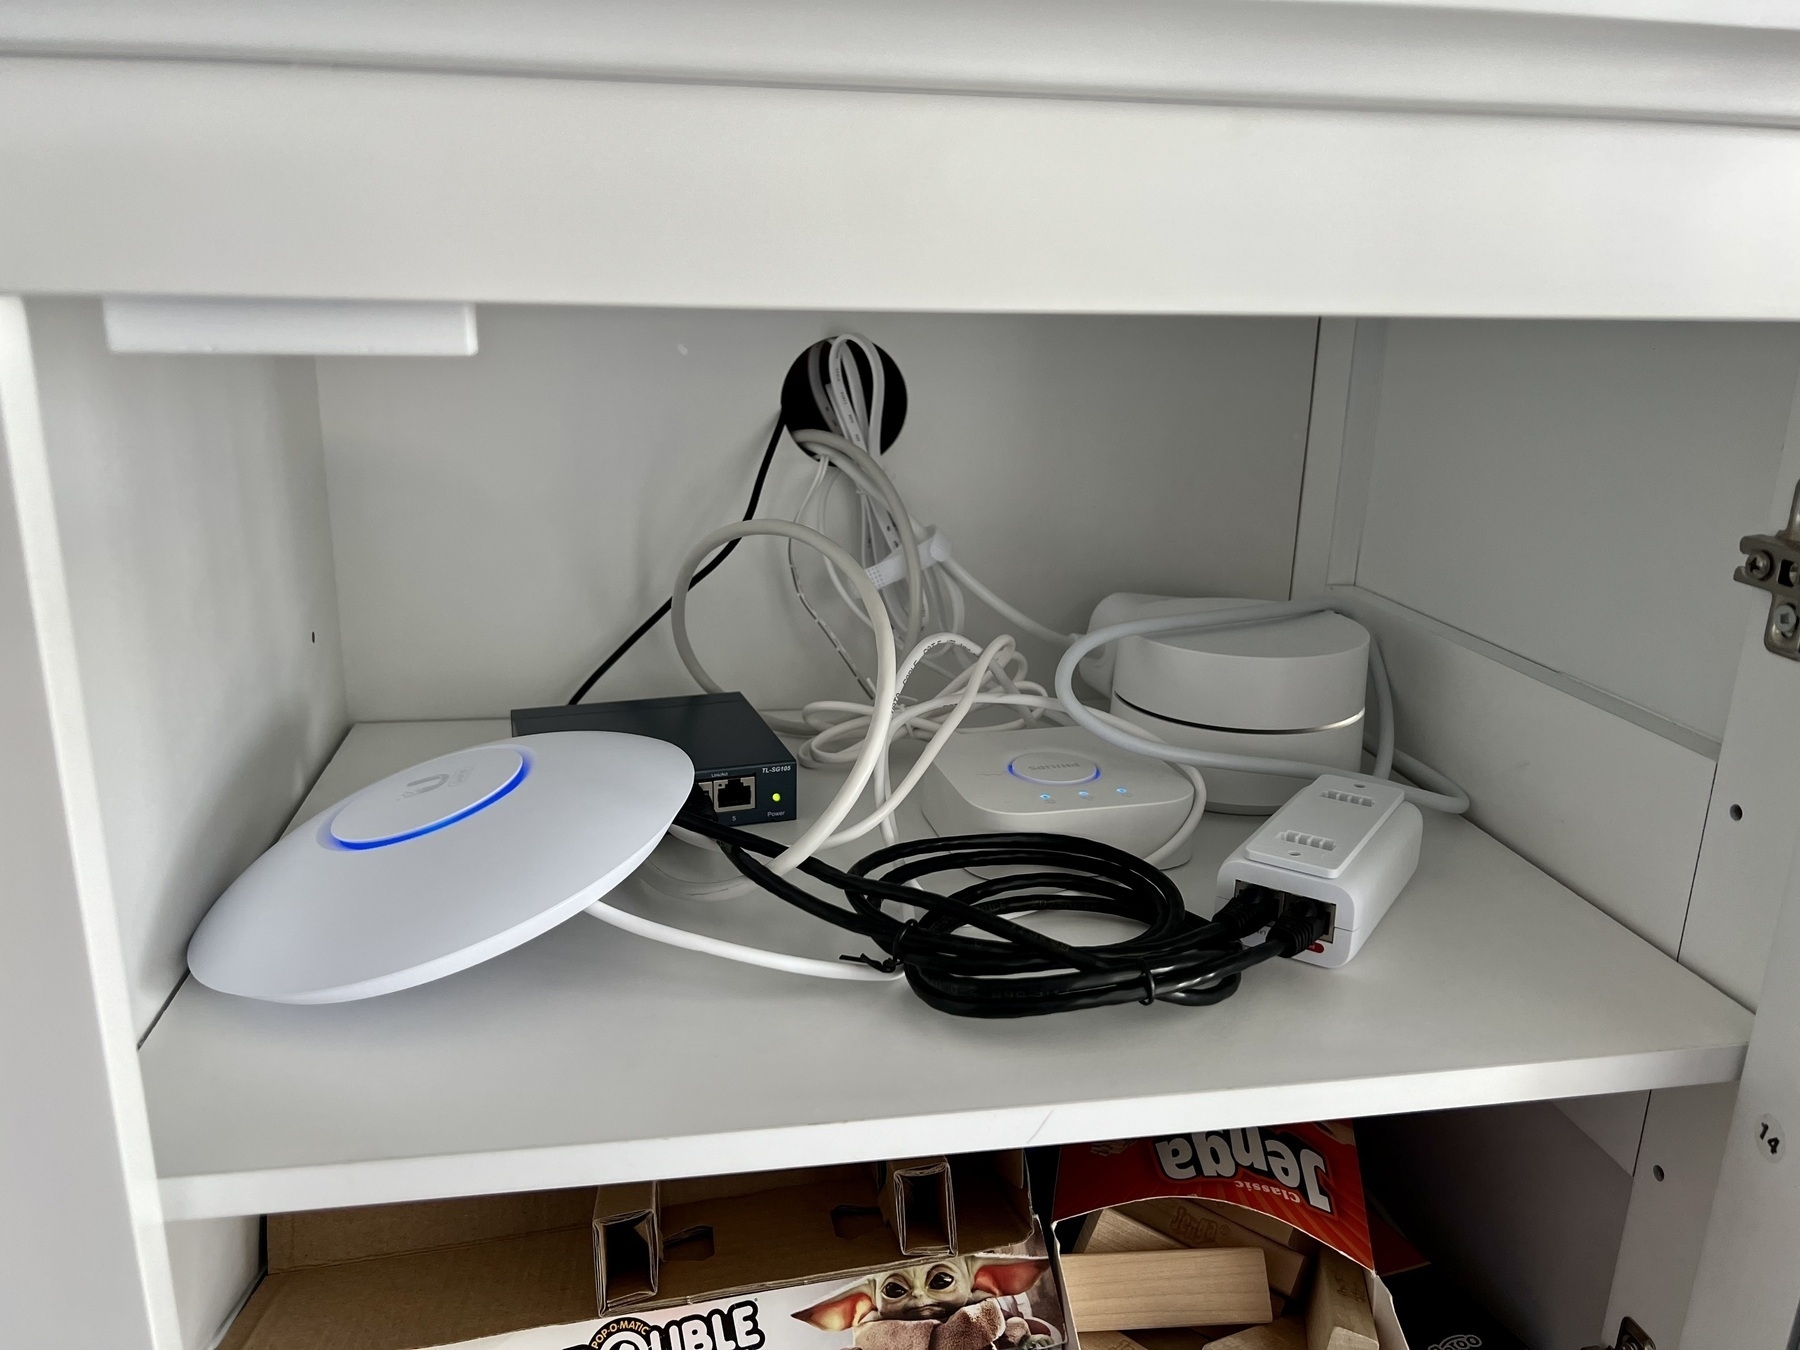 Lots of networking gear (Uni-Fi access point, networking switch, google access point, Phillips Hue hub, and PoE injector) on a shelf, inside a cabinet.